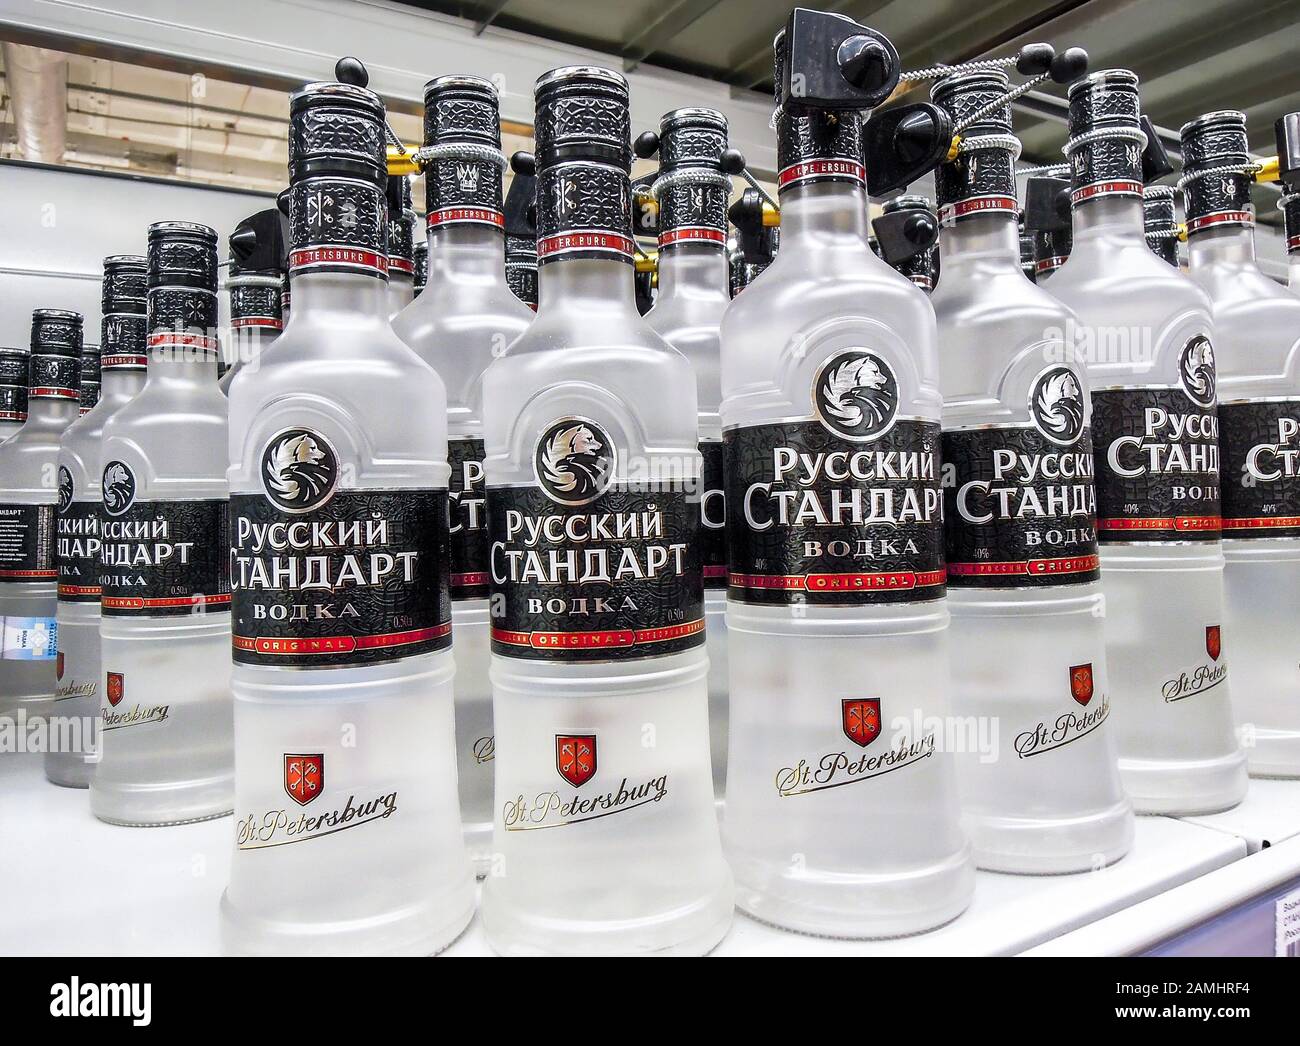 Samara, Russia - January 12, 2020: Russian vodka ready for sale on the shelf in superstore. Various bottled alcoholic beverages Stock Photo